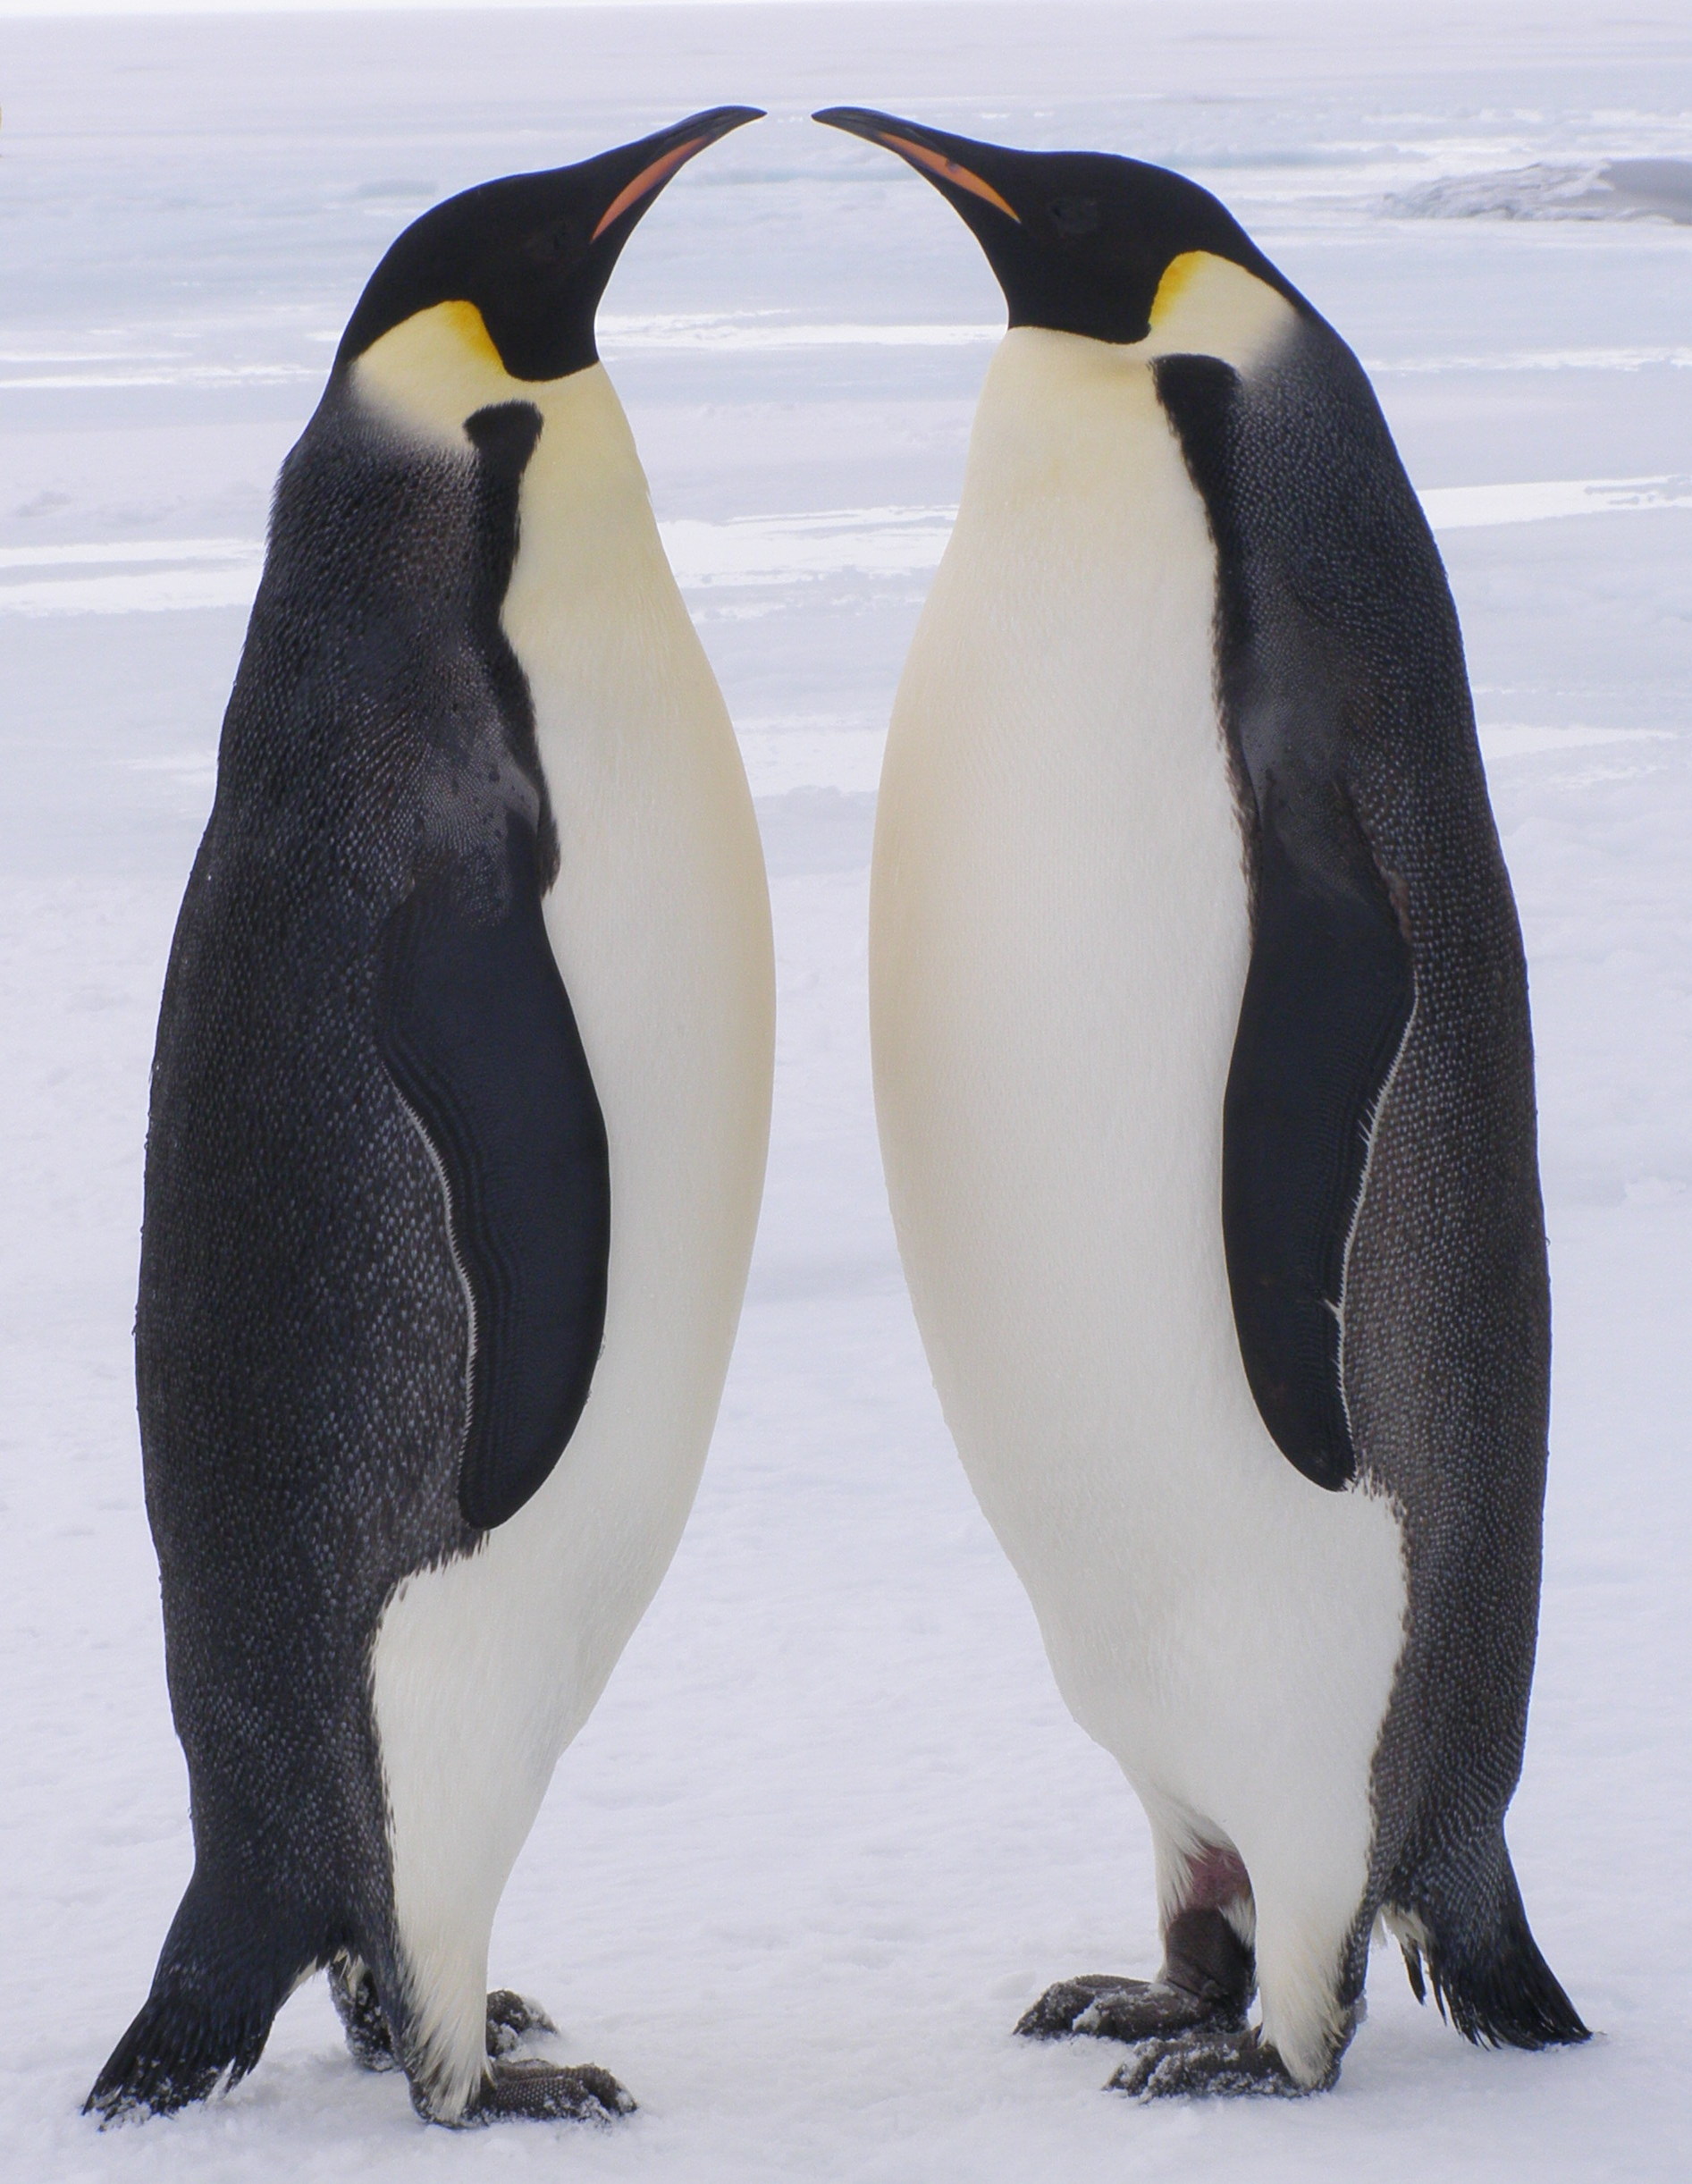 Pair of courting emperor penguins